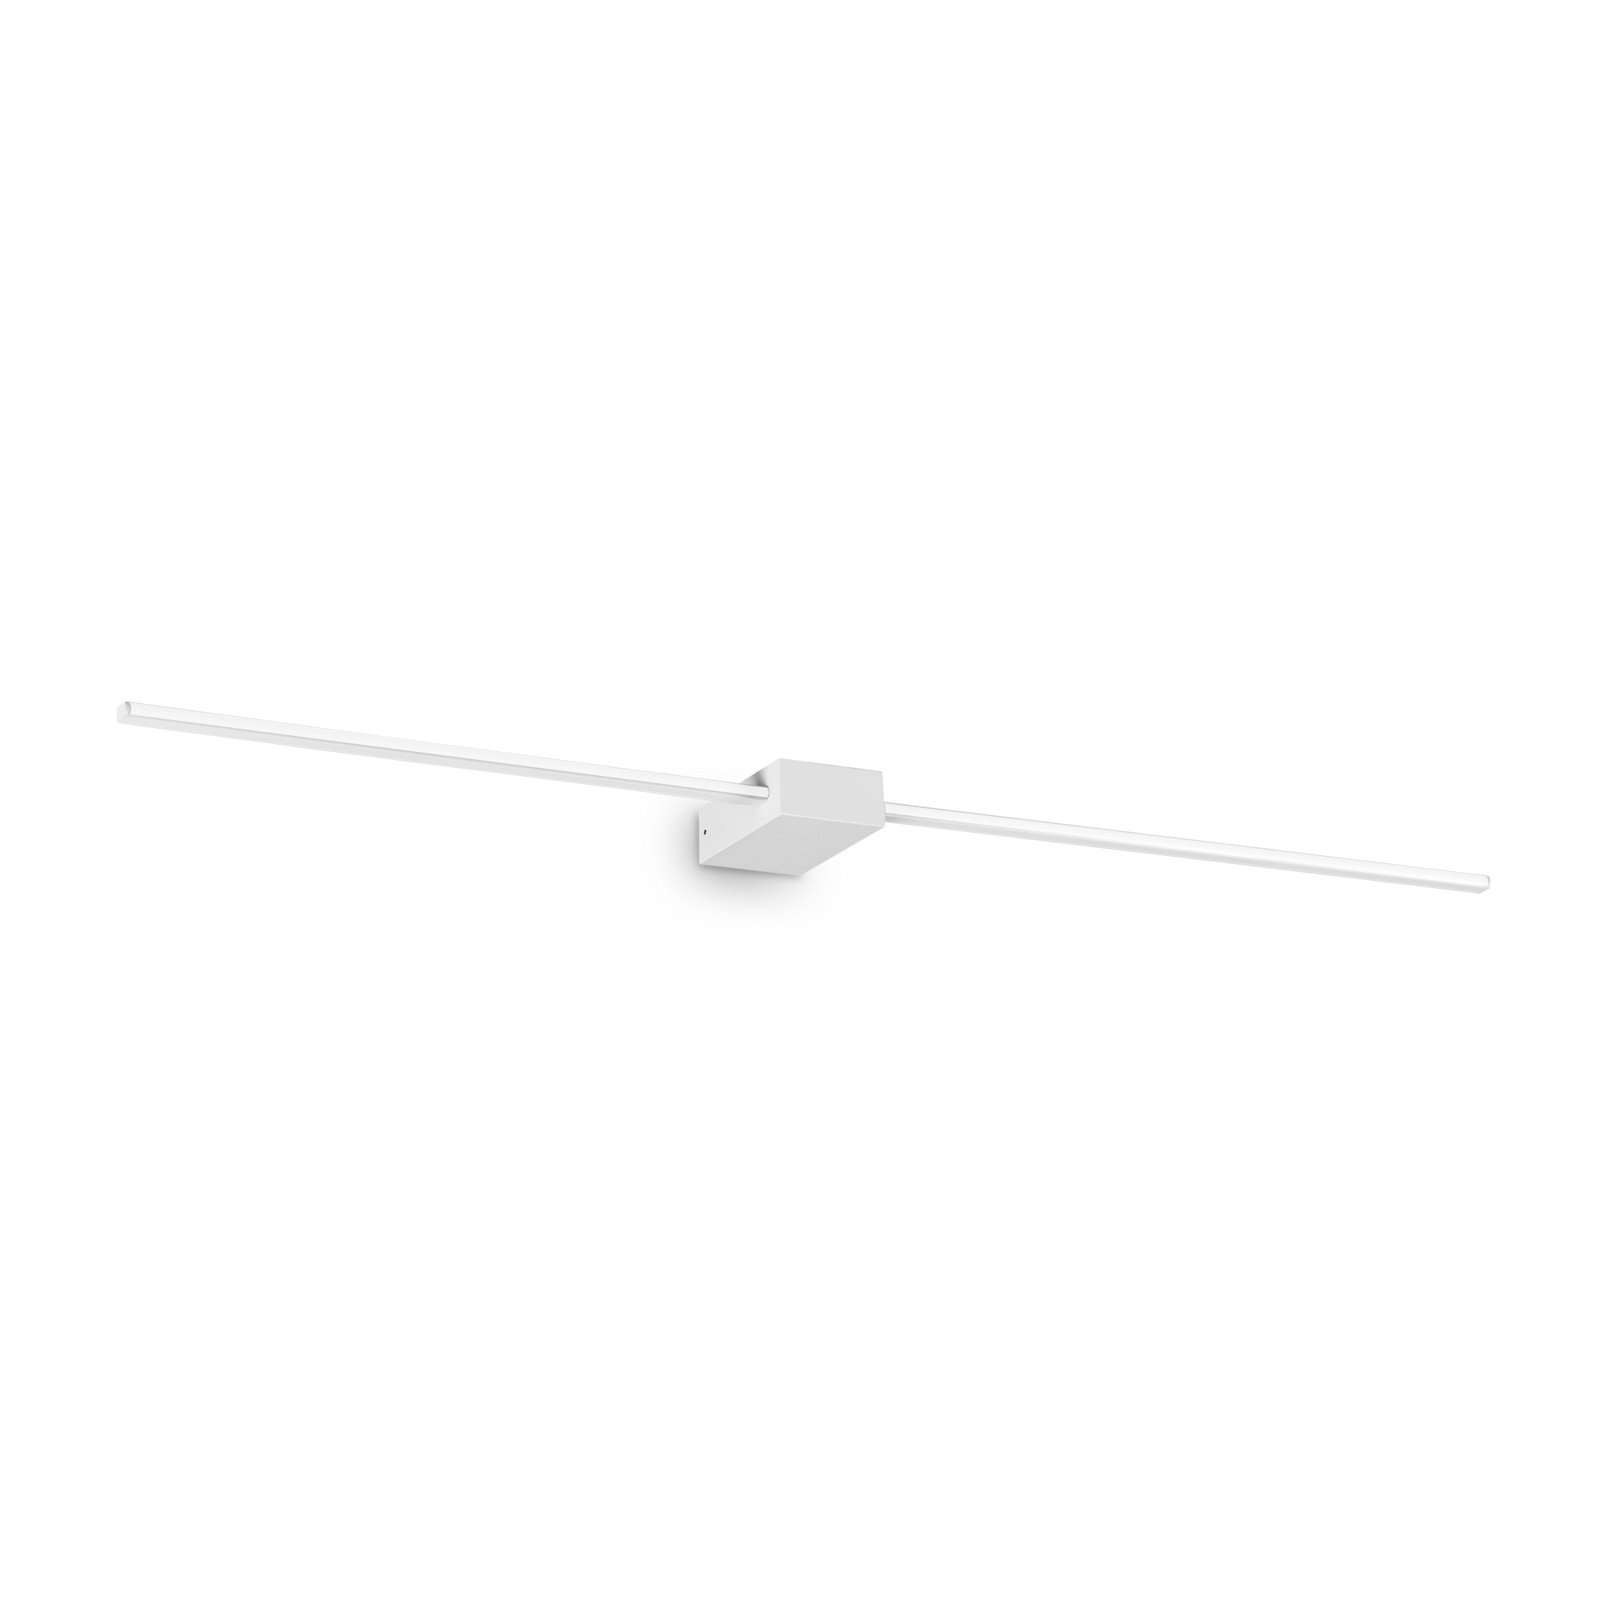 Ideal Lux LED wall light Theo white, width 115 cm aluminium